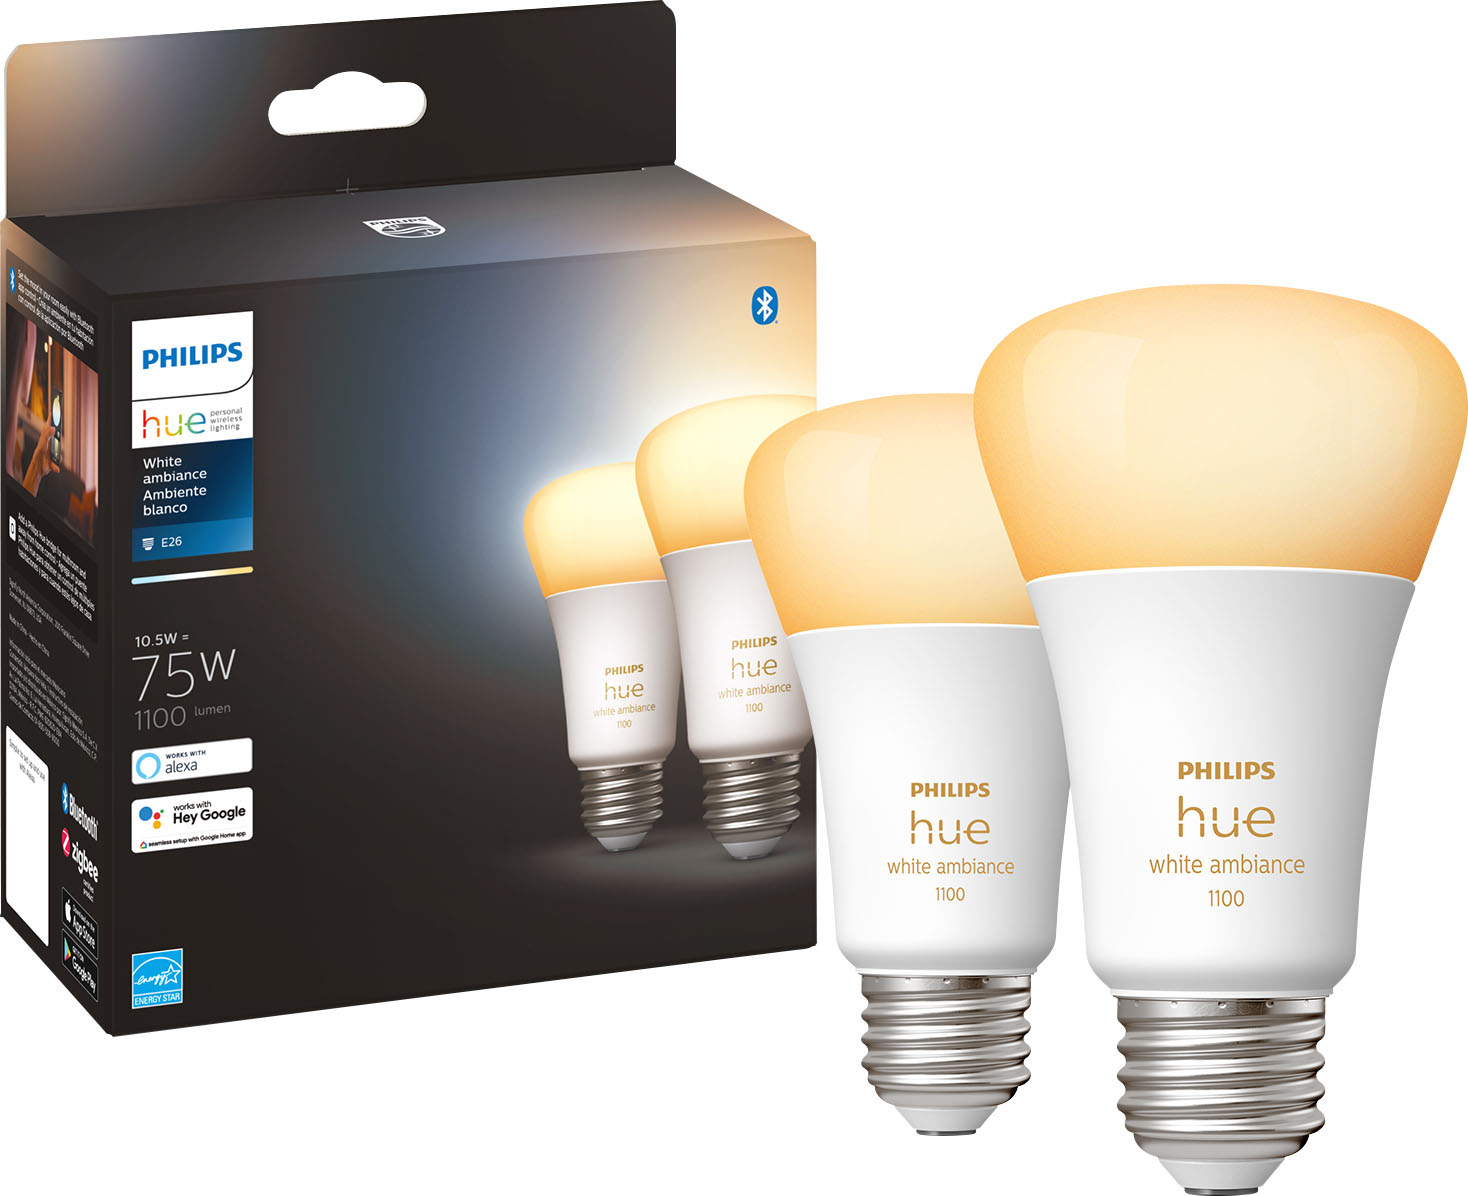 Monet Vereniging Naschrift Philips Geek Squad Certified Refurbished Hue White Ambiance A19 Bluetooth  75W Smart LED Bulbs (2-pack) GSRF 563346 - Best Buy